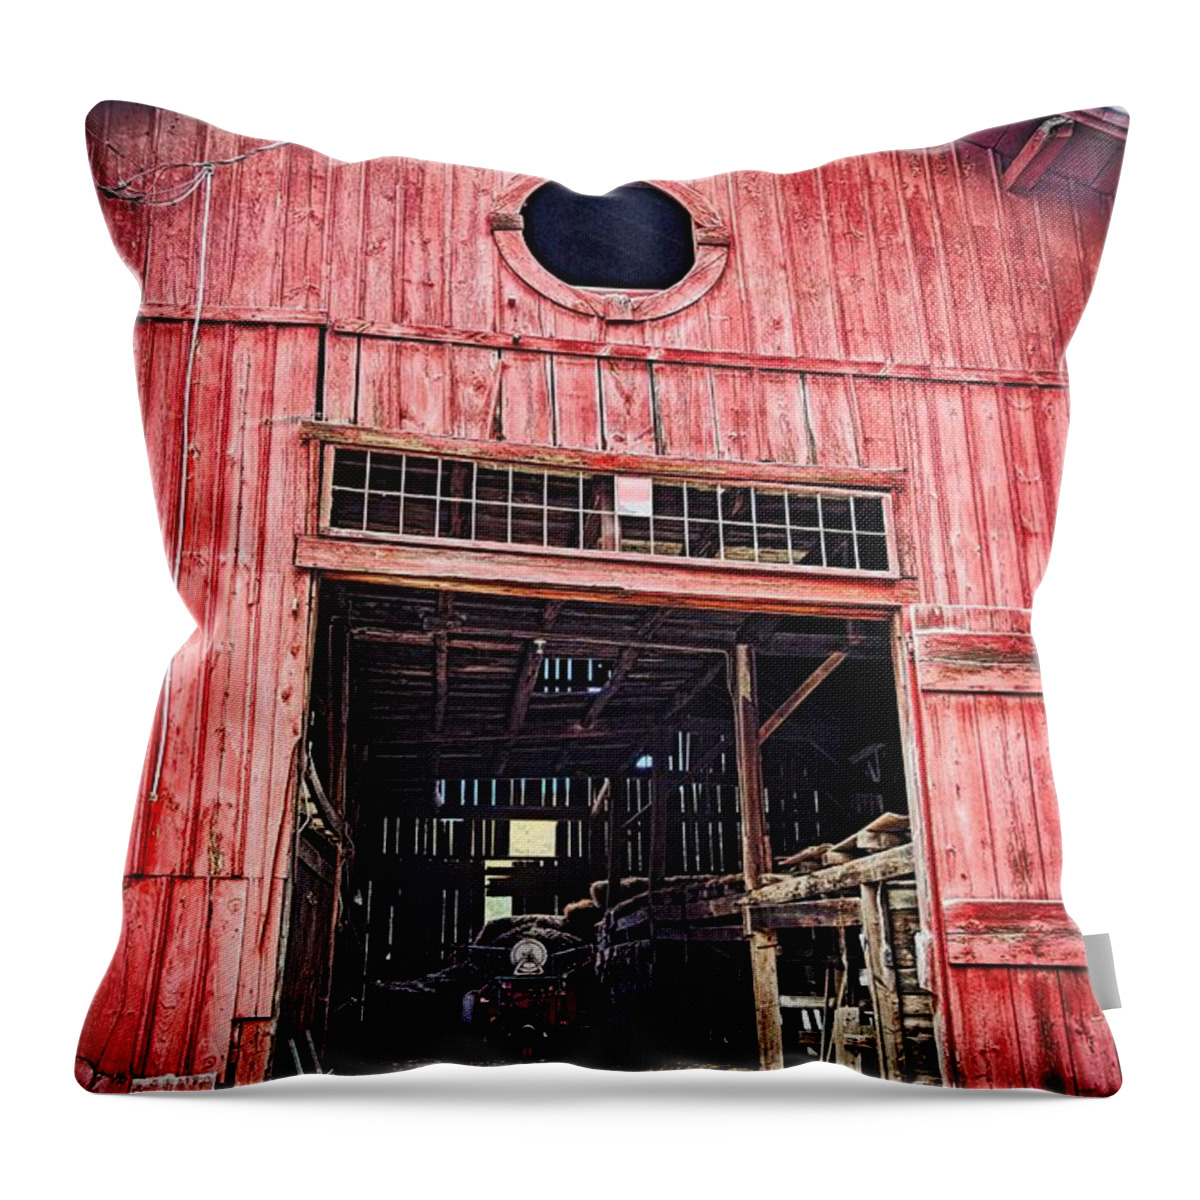 Wooden Red Barn Throw Pillow featuring the photograph Red Barn by Joan Reese